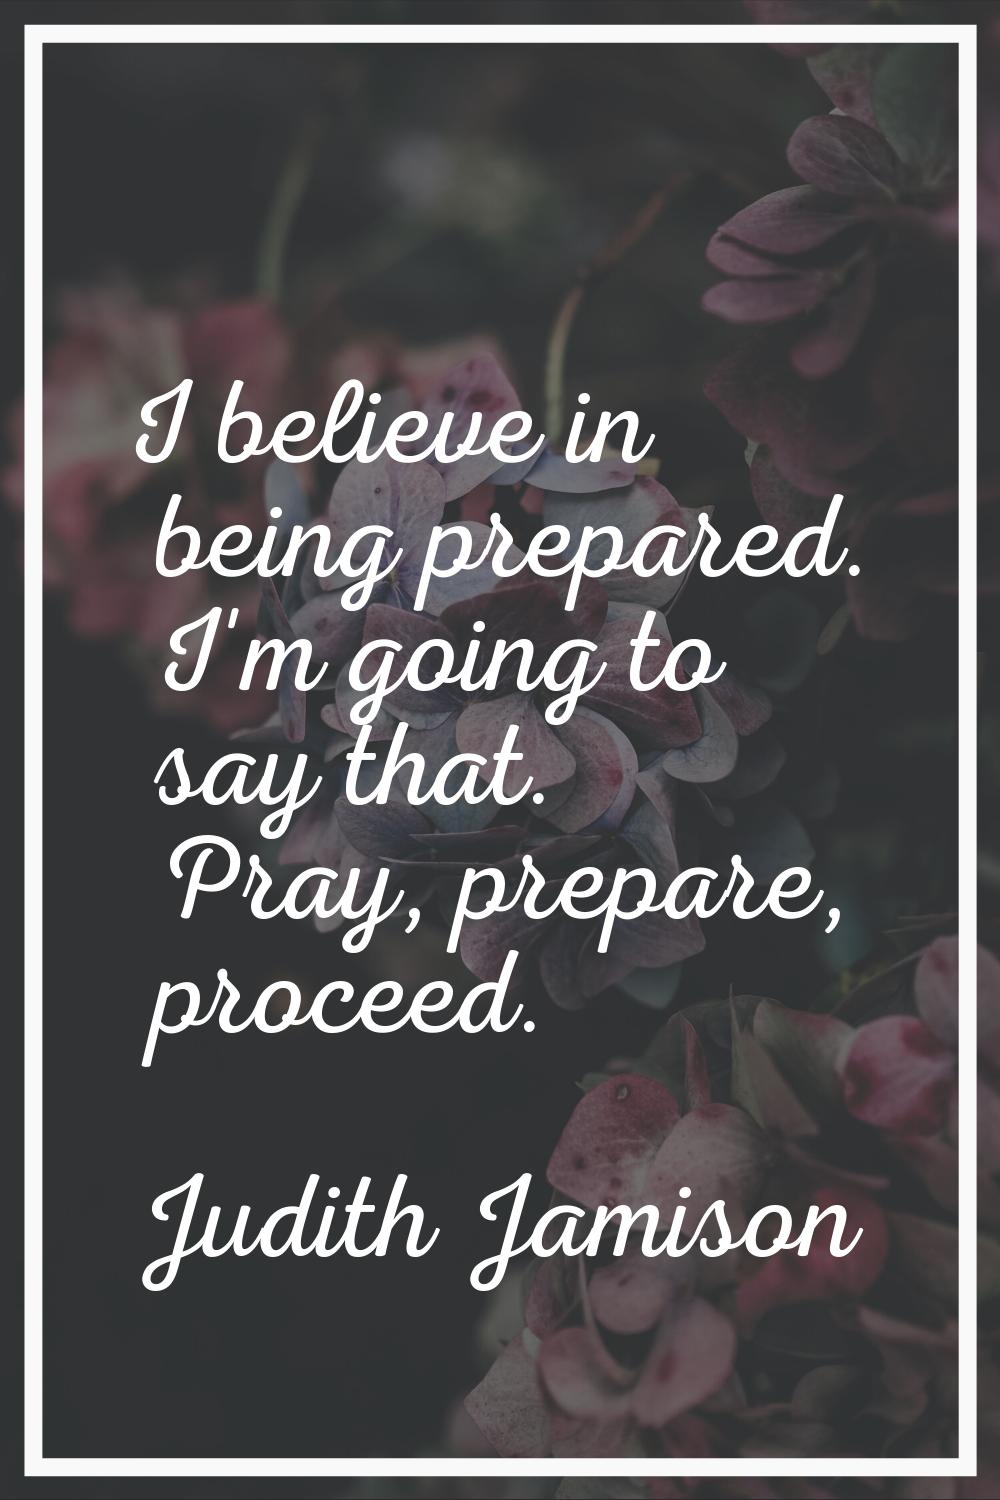 I believe in being prepared. I'm going to say that. Pray, prepare, proceed.